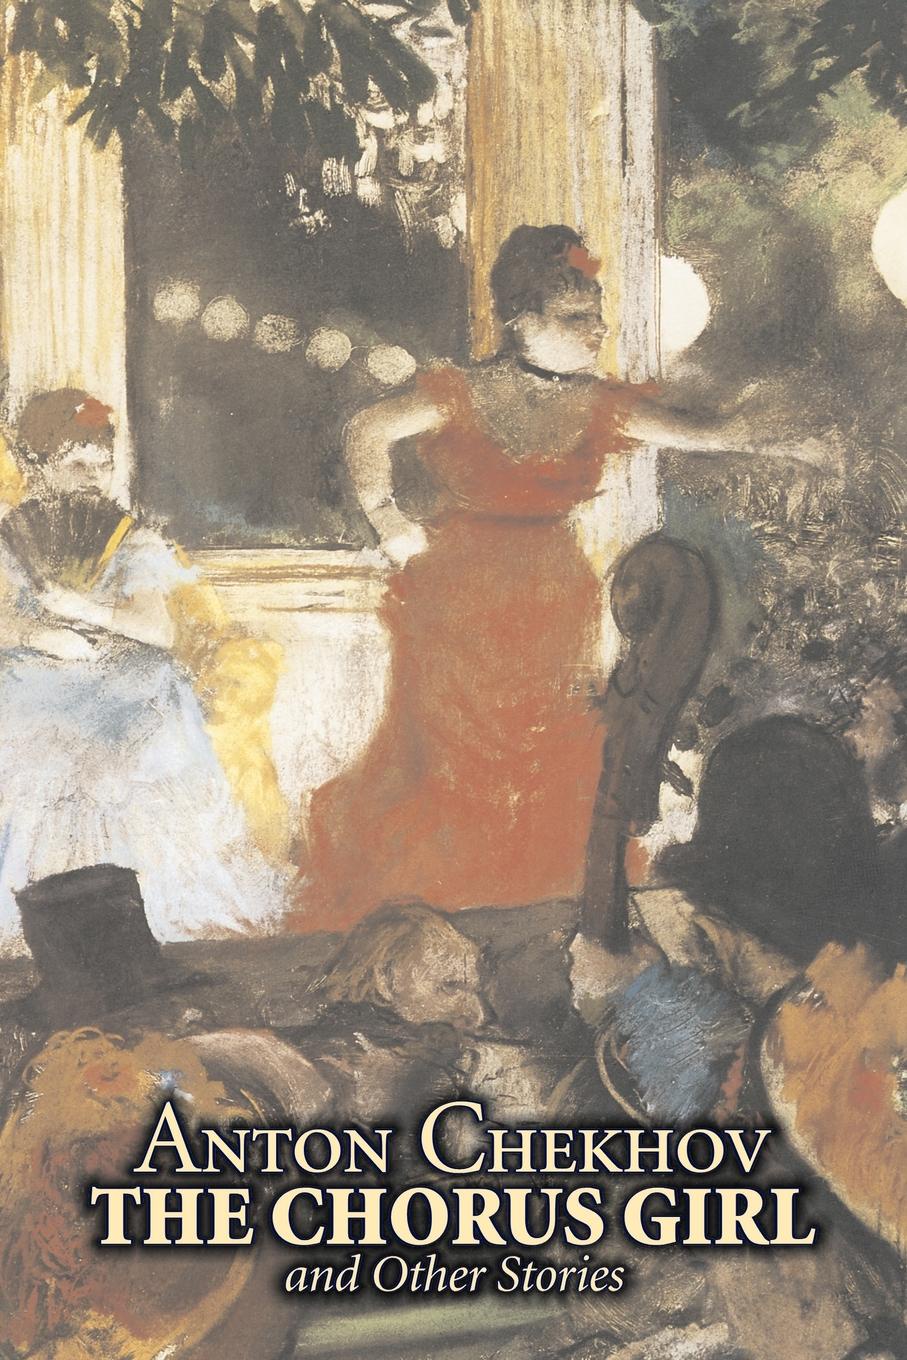 The Chorus Girl and Other Stories by Anton Chekhov, Fiction, Short Stories, Classics, Literary